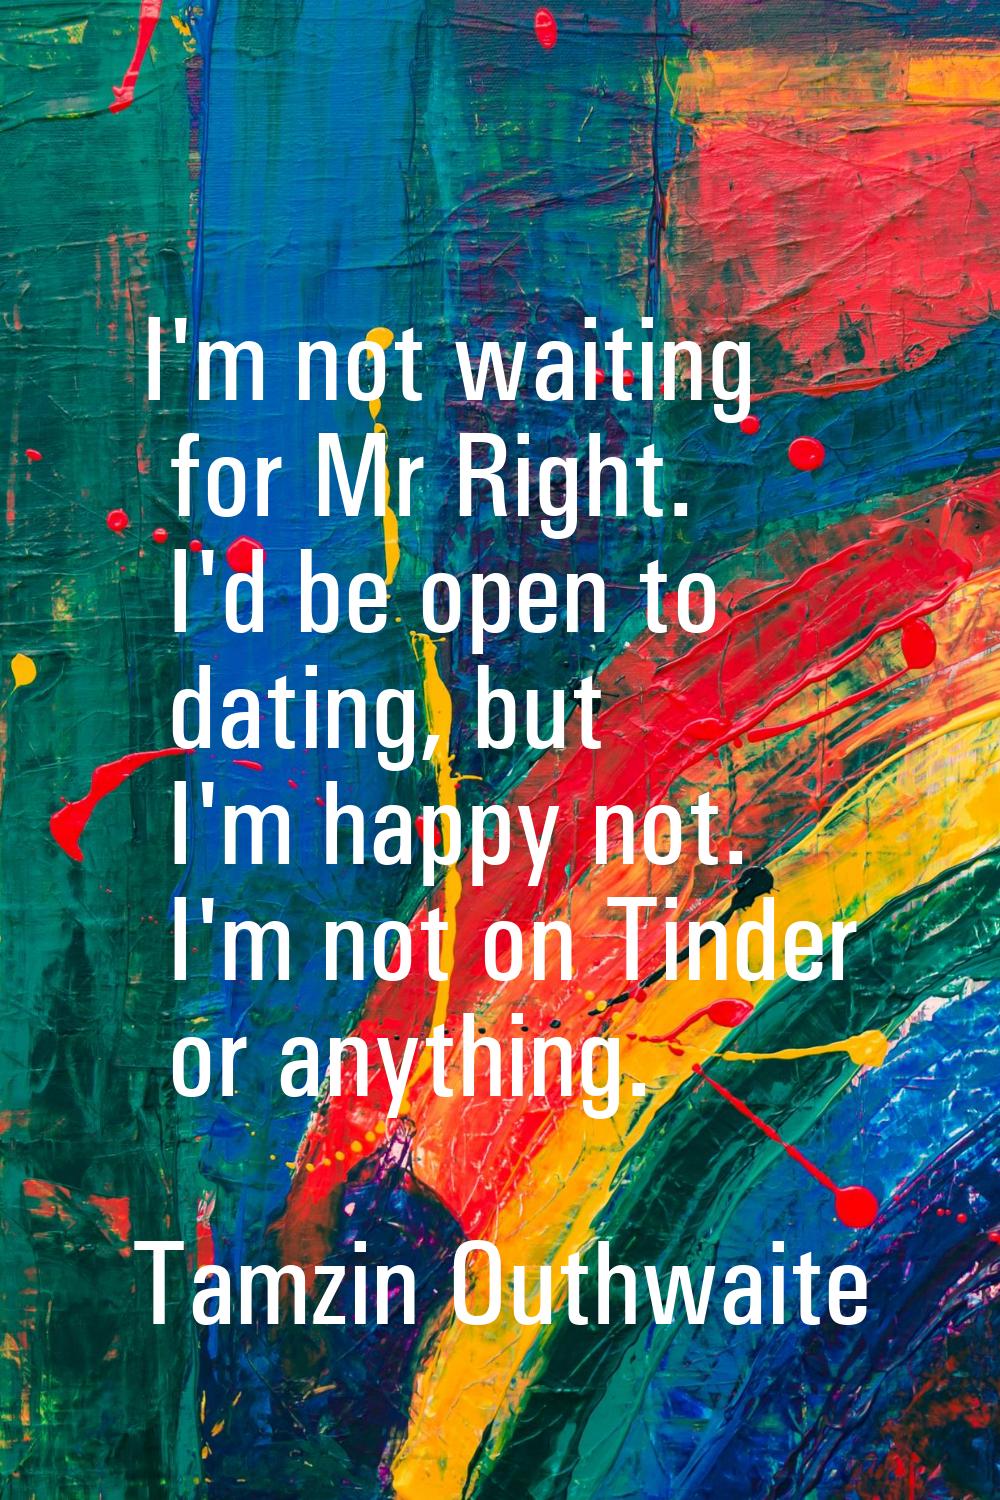 I'm not waiting for Mr Right. I'd be open to dating, but I'm happy not. I'm not on Tinder or anythi